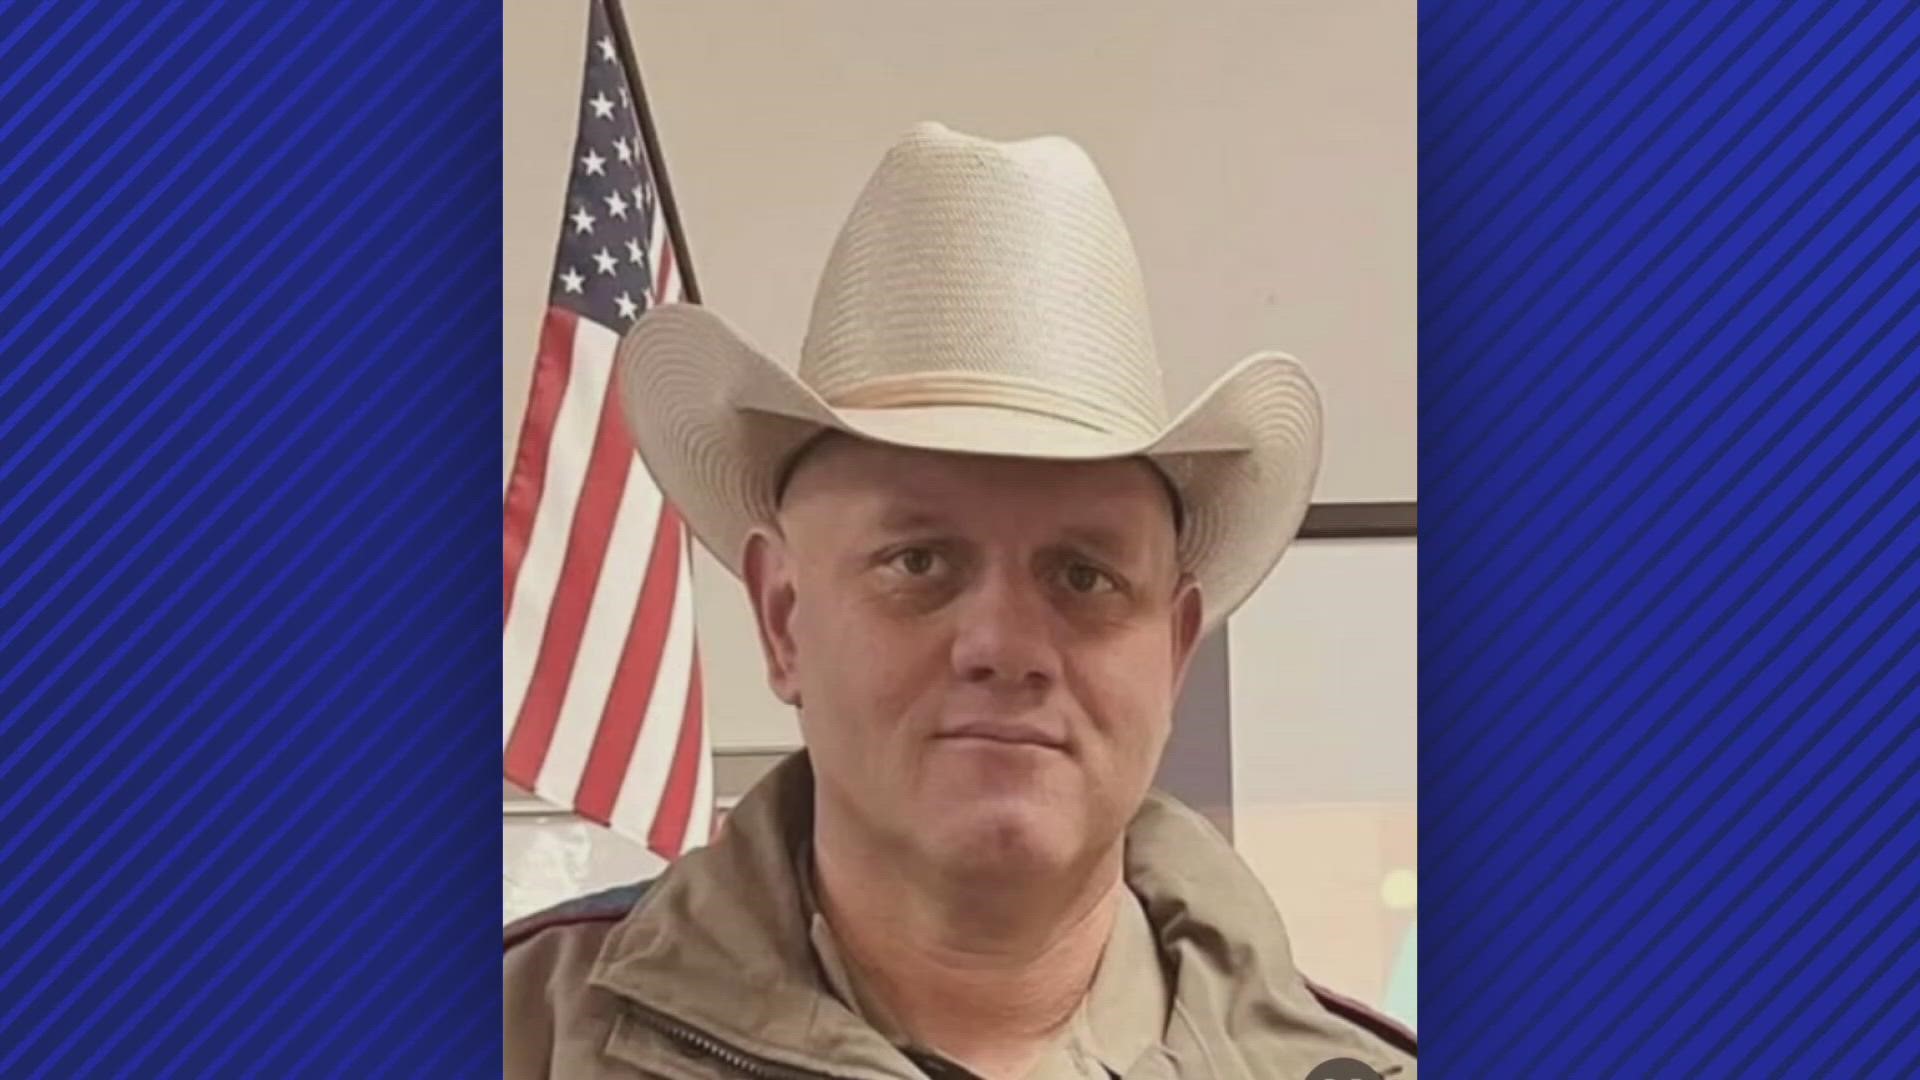 DPS officials say the trooper was seriously injured in a weather-related Navarro County crash. But he's now alert and able to breath on his own.